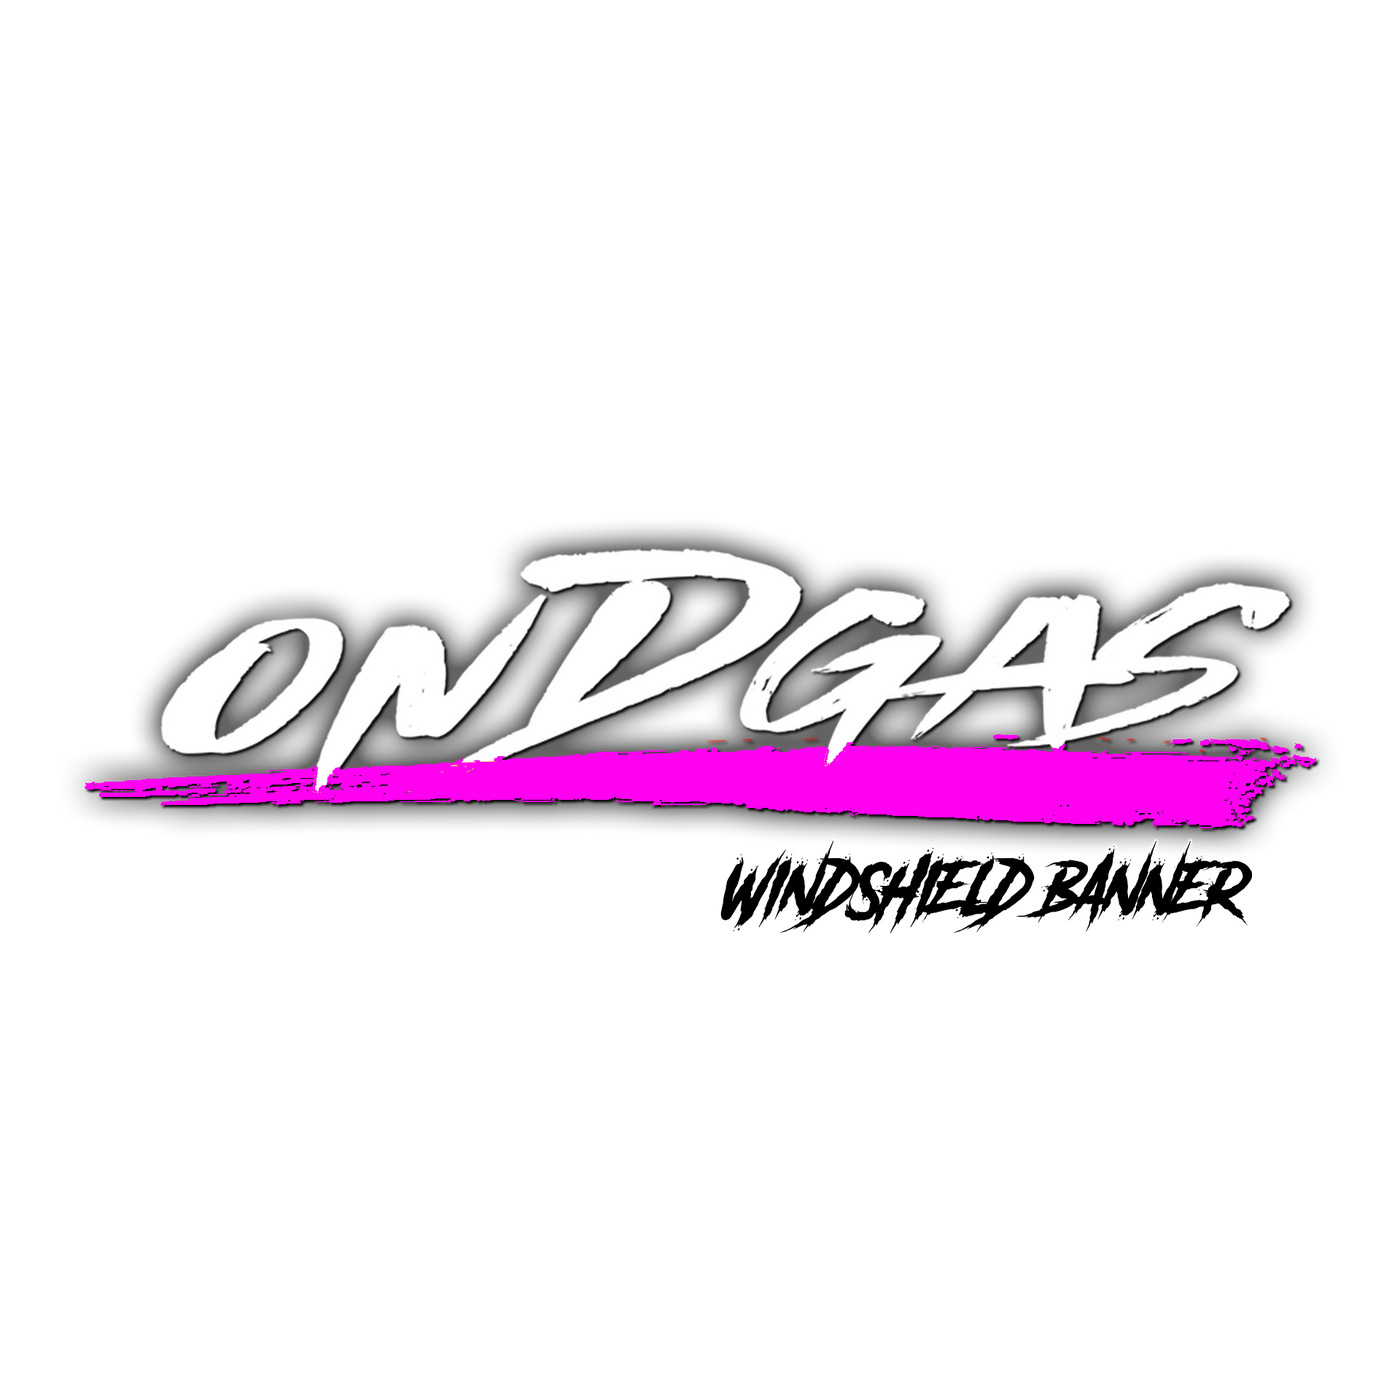 Pink and White ONDGAS WINDSHIELD decal